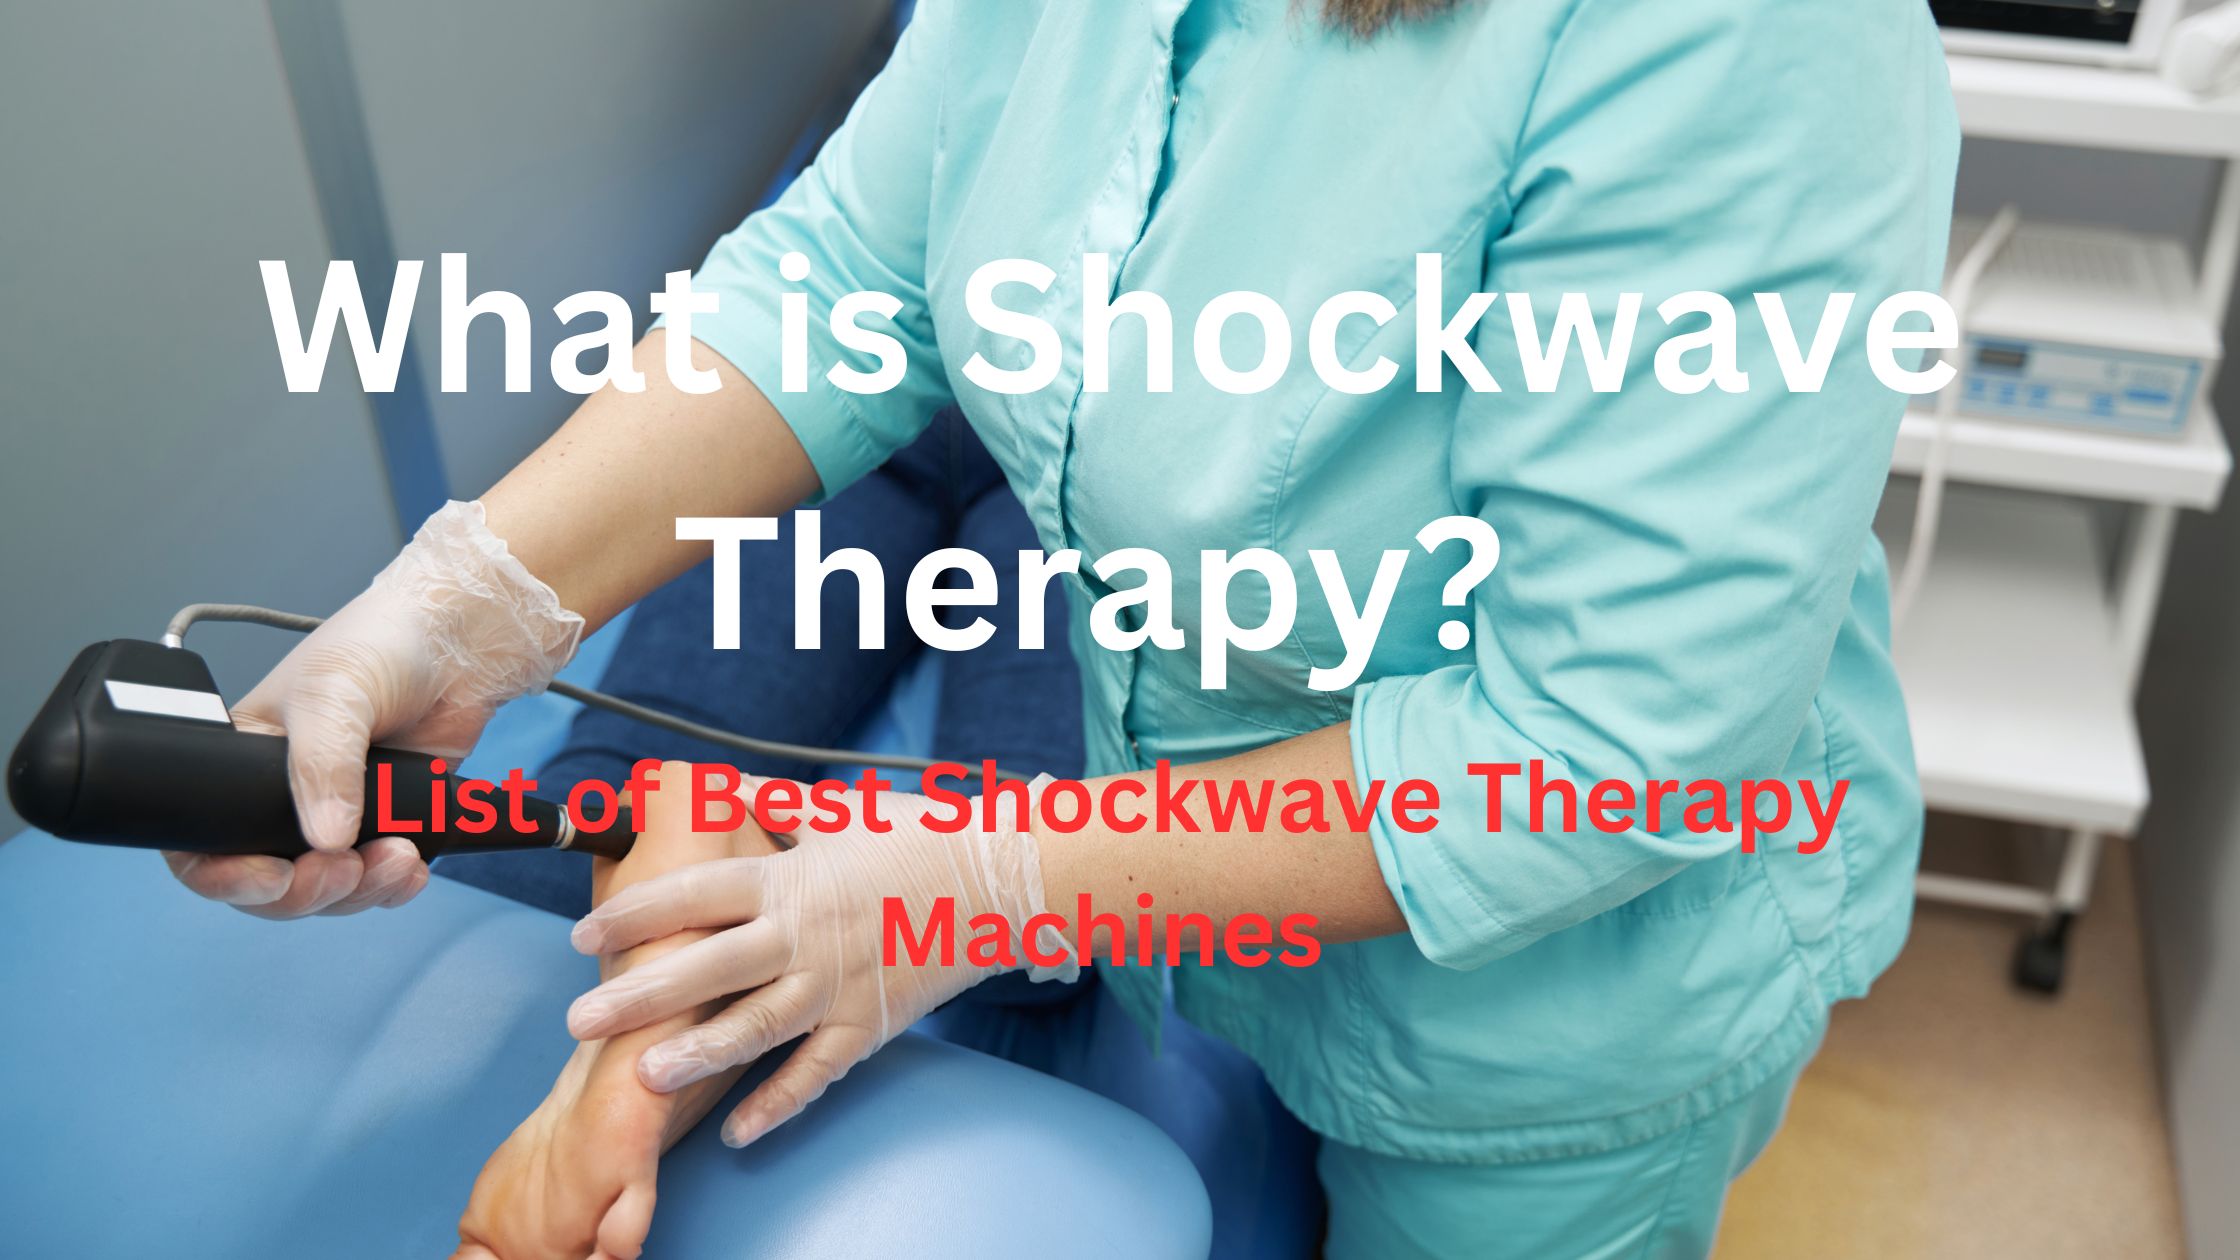 shockwave therapy machines list